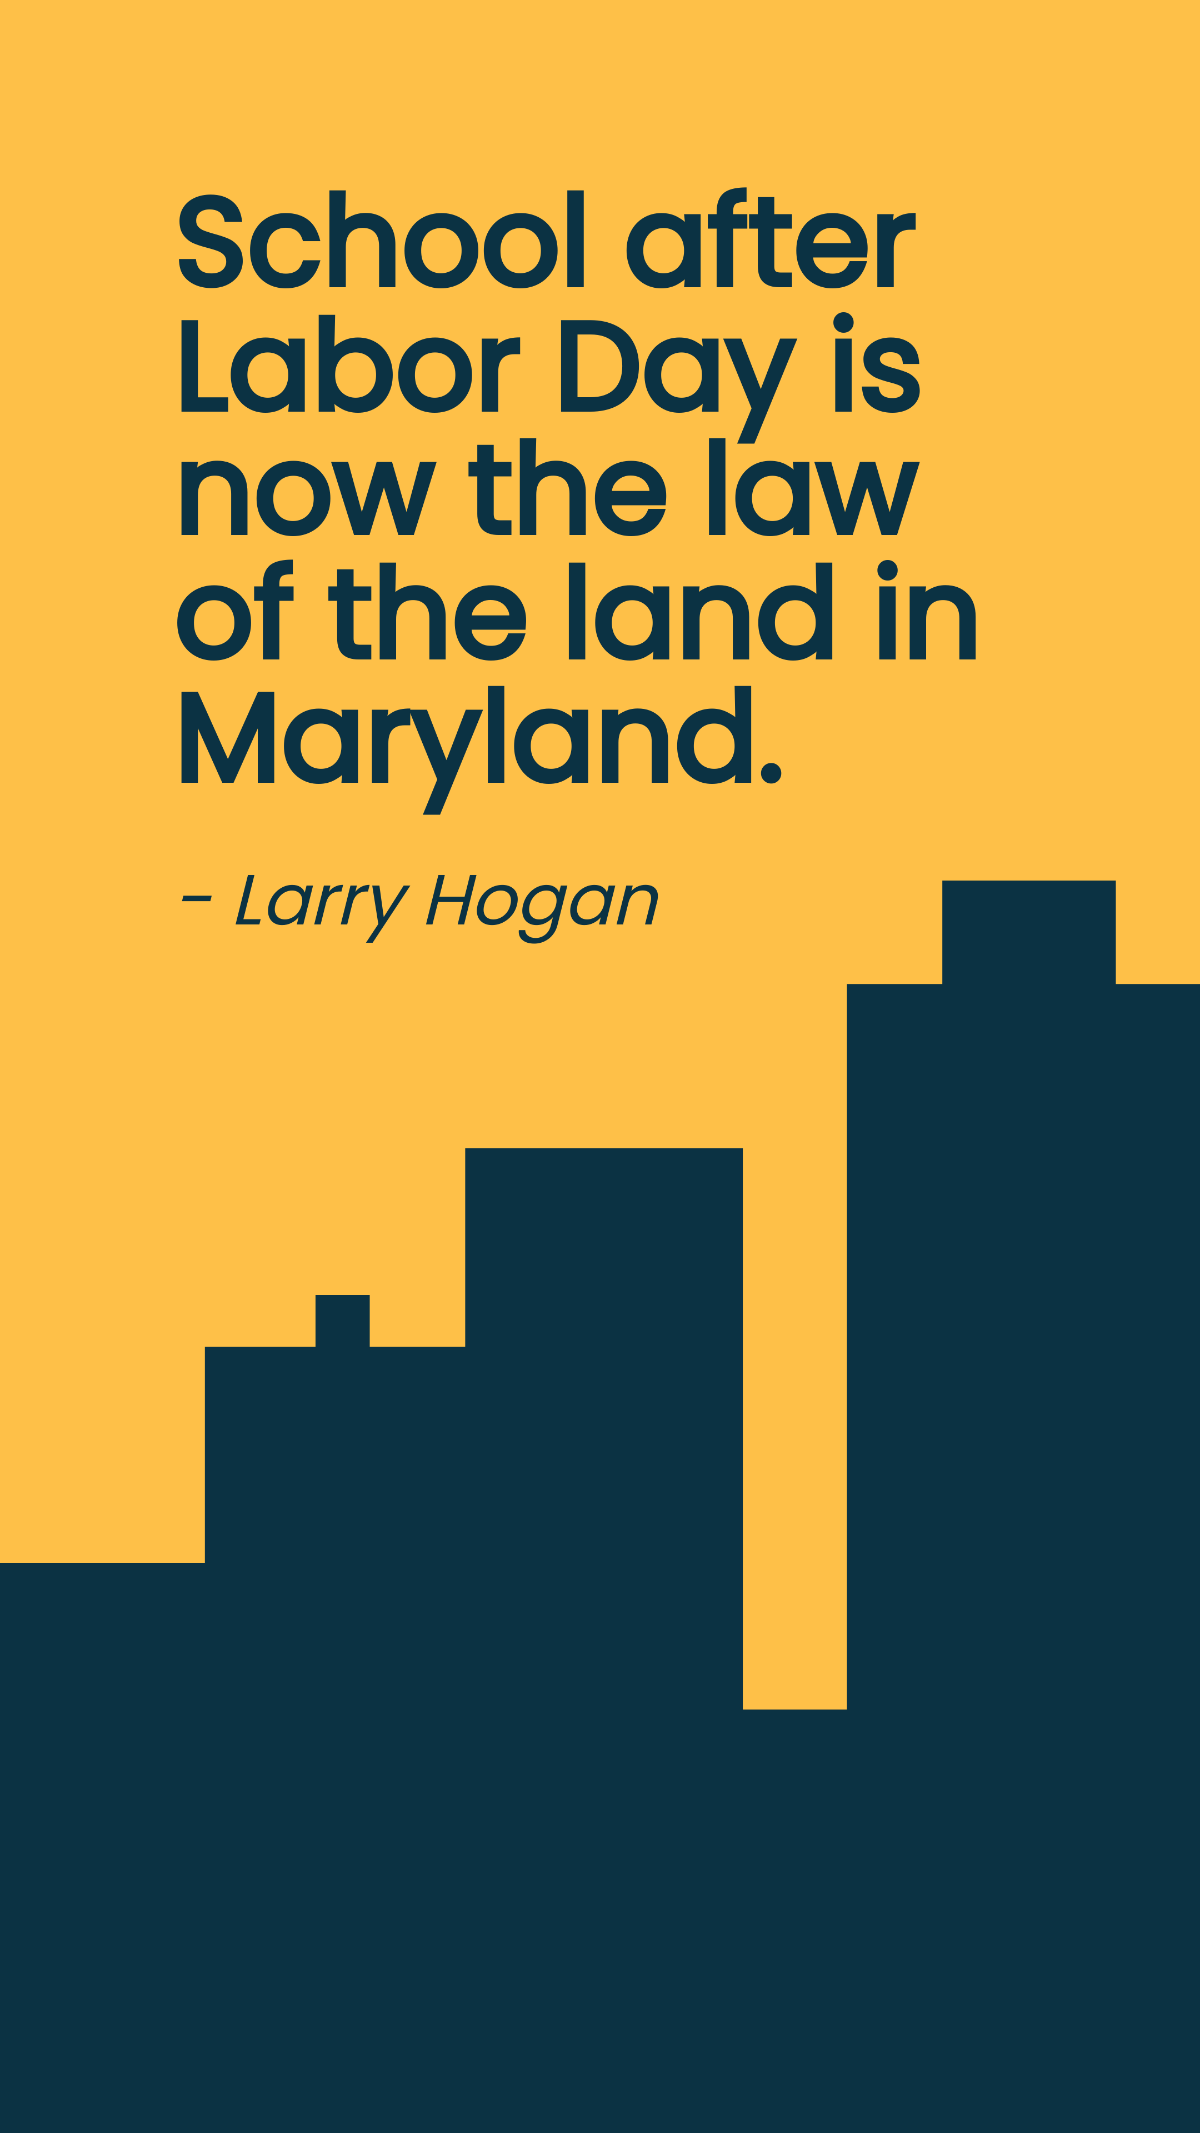 Free Larry Hogan - School after Labor Day is now the law of the land in Maryland. Template